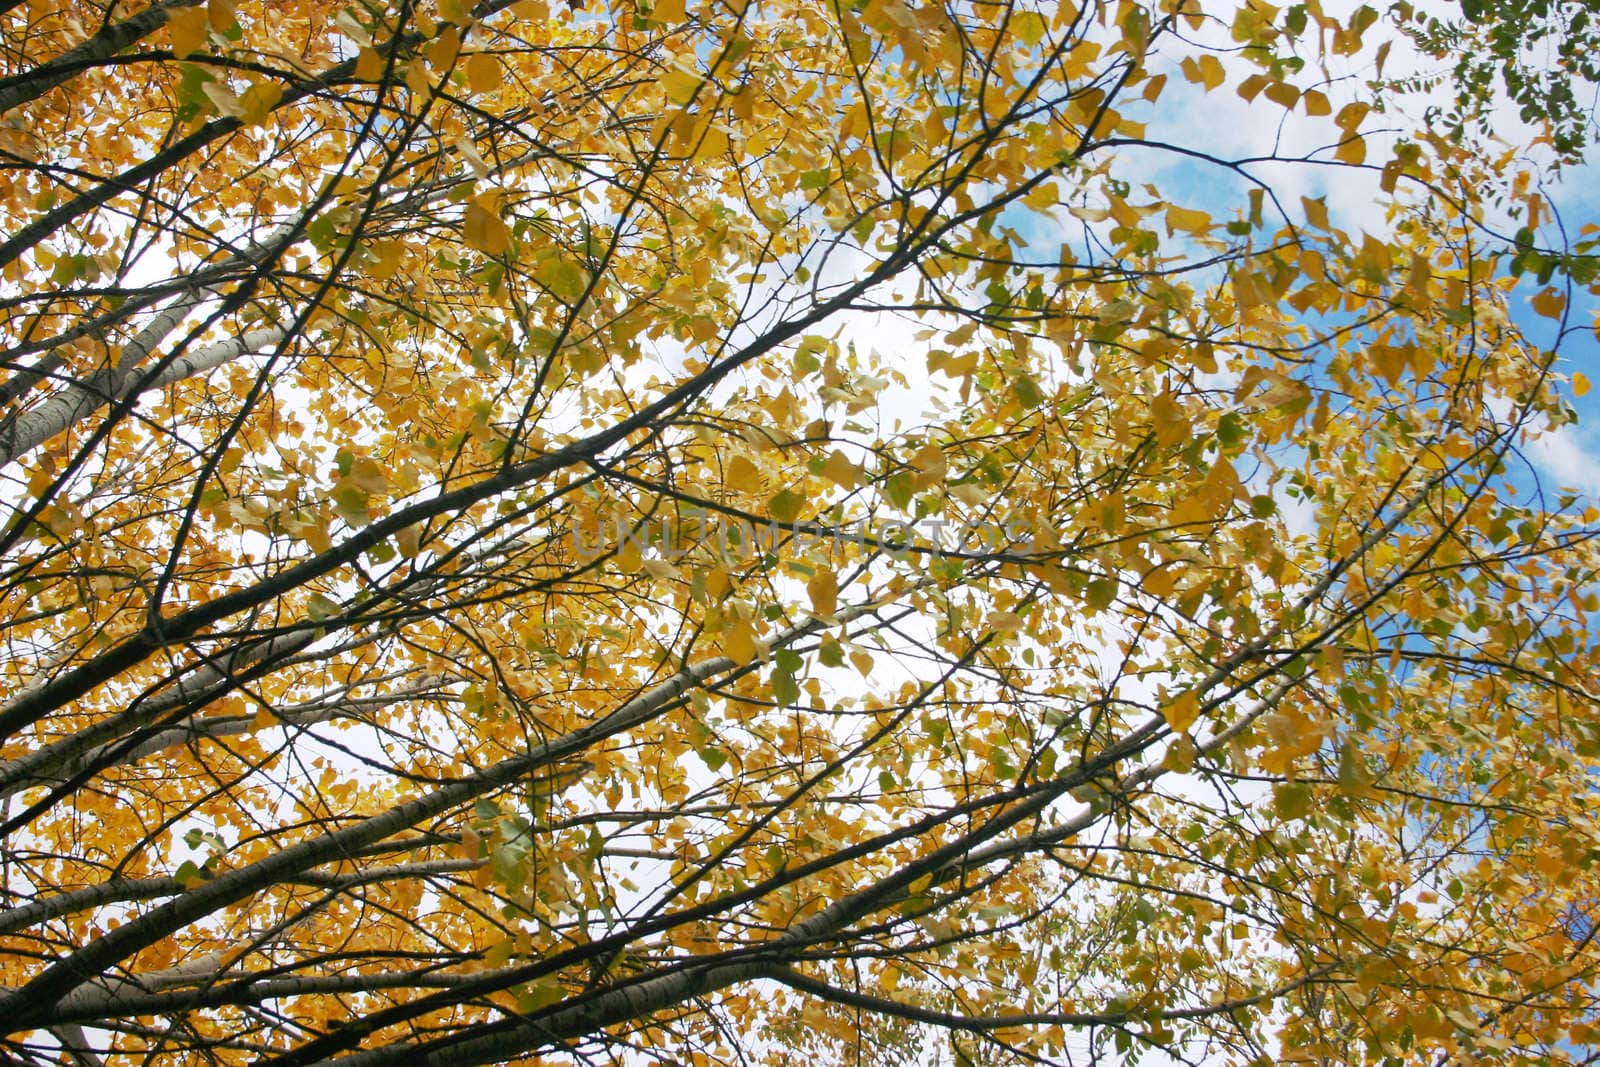 Birch leafes and branches against sky, atumn colors